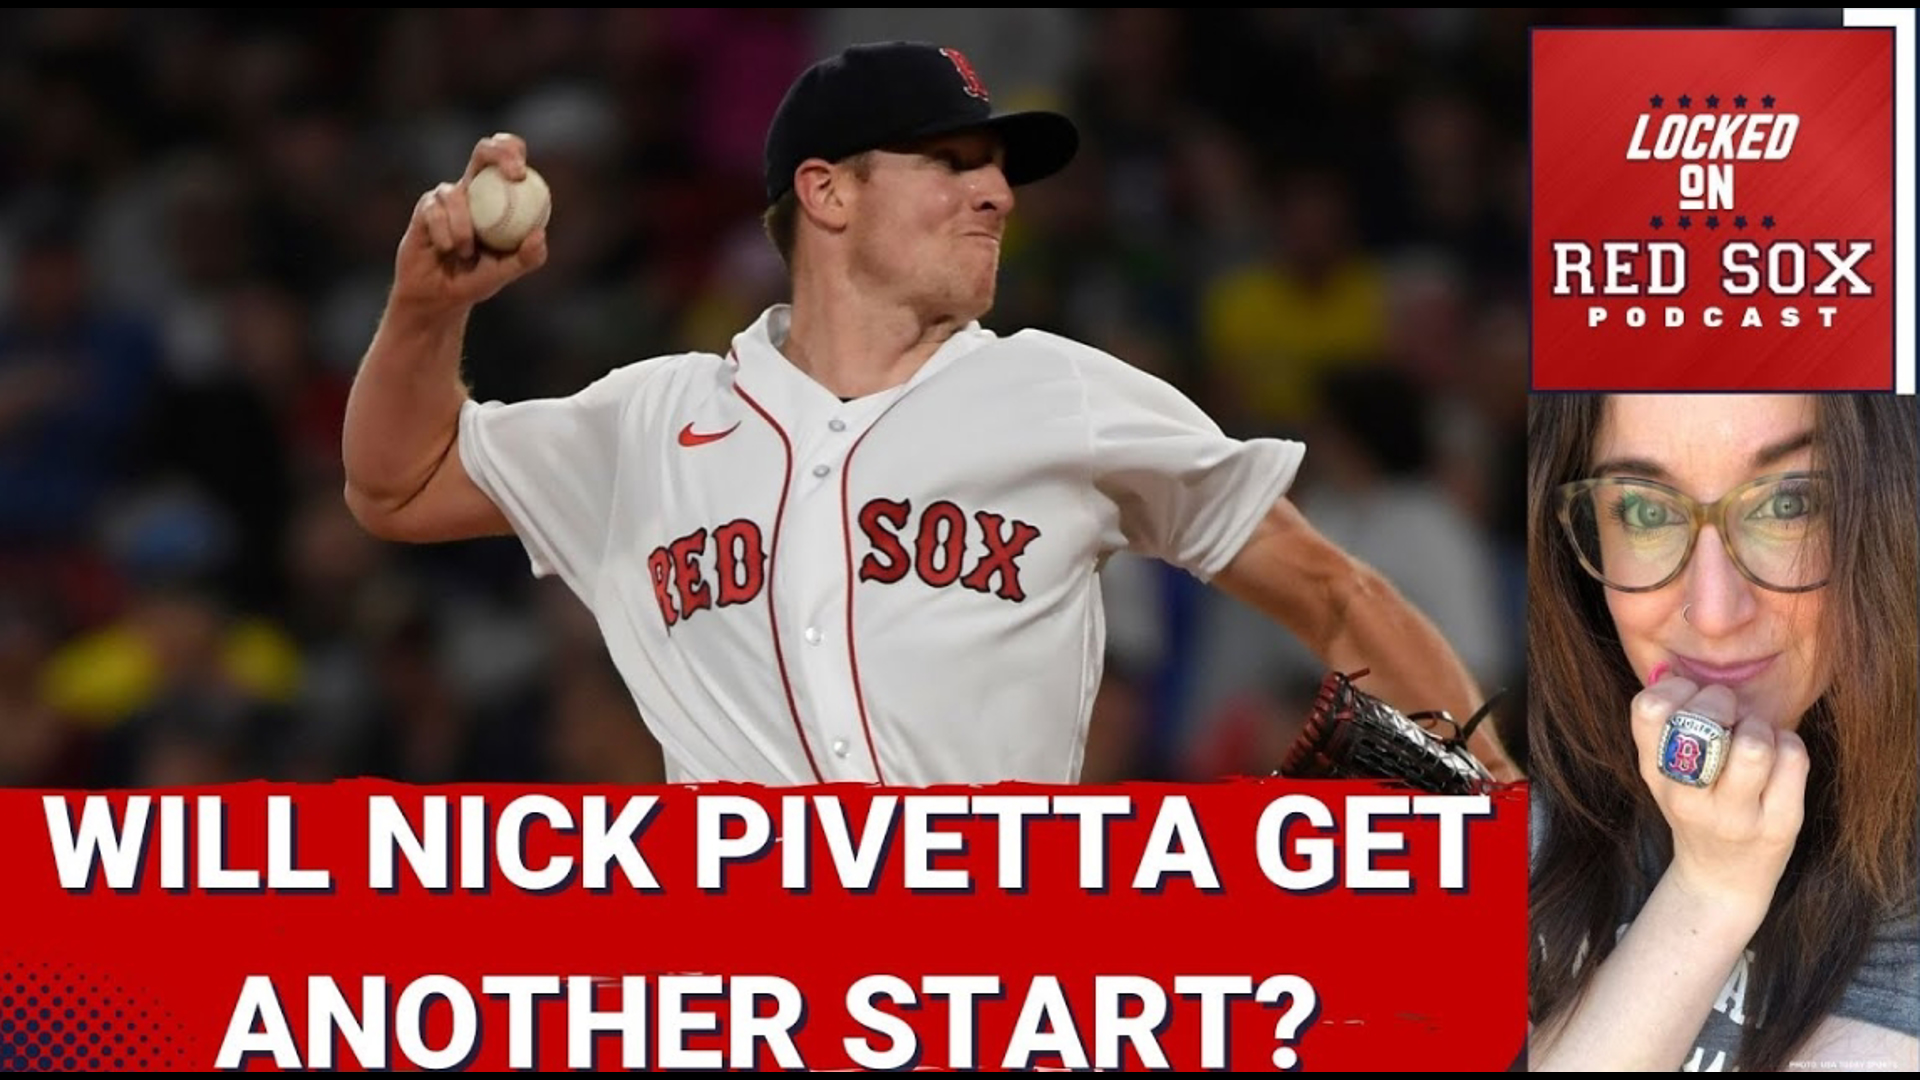 Alex Cora wouldn't commit to Nick Pivetta making his next start after giving up four runs in the Boston Red Sox's 9-4 win over the Seattle Mariners on Tuesday night.